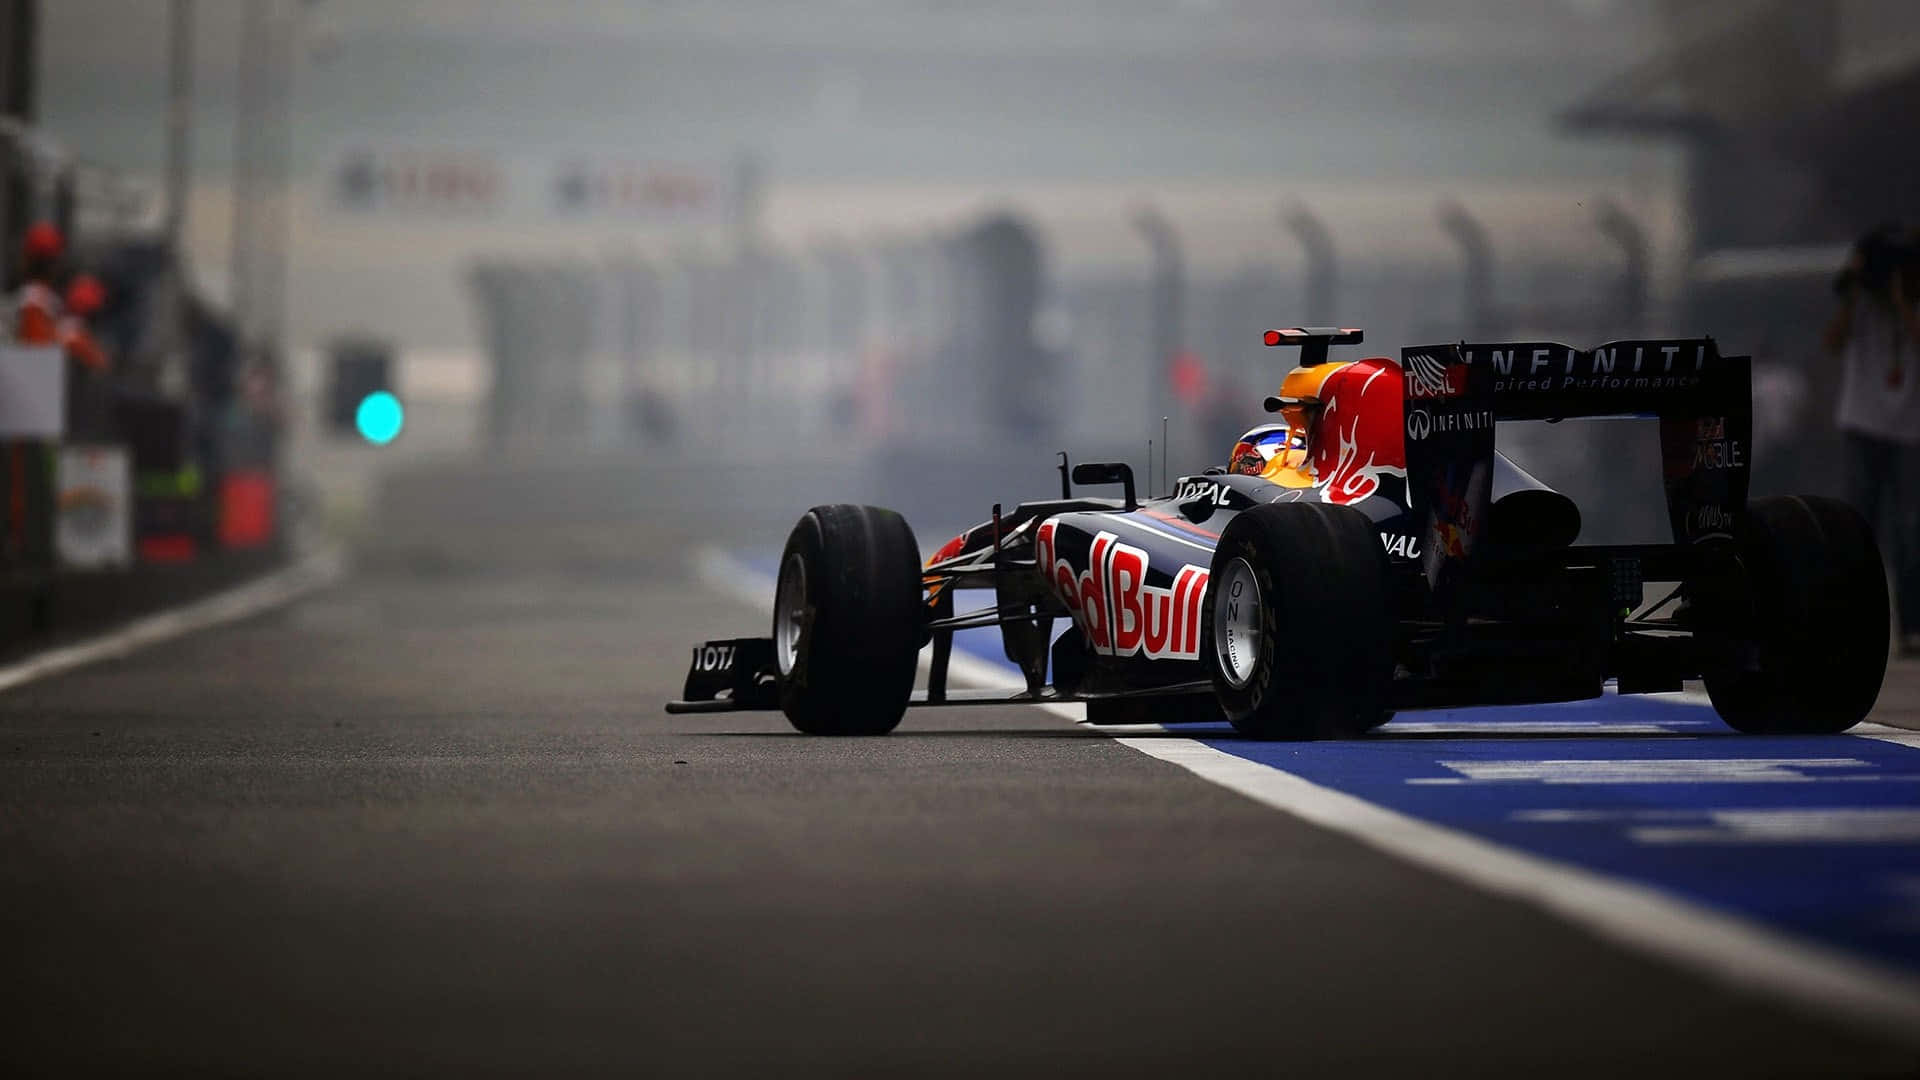 Red Bull Racing Car Driving On A Track